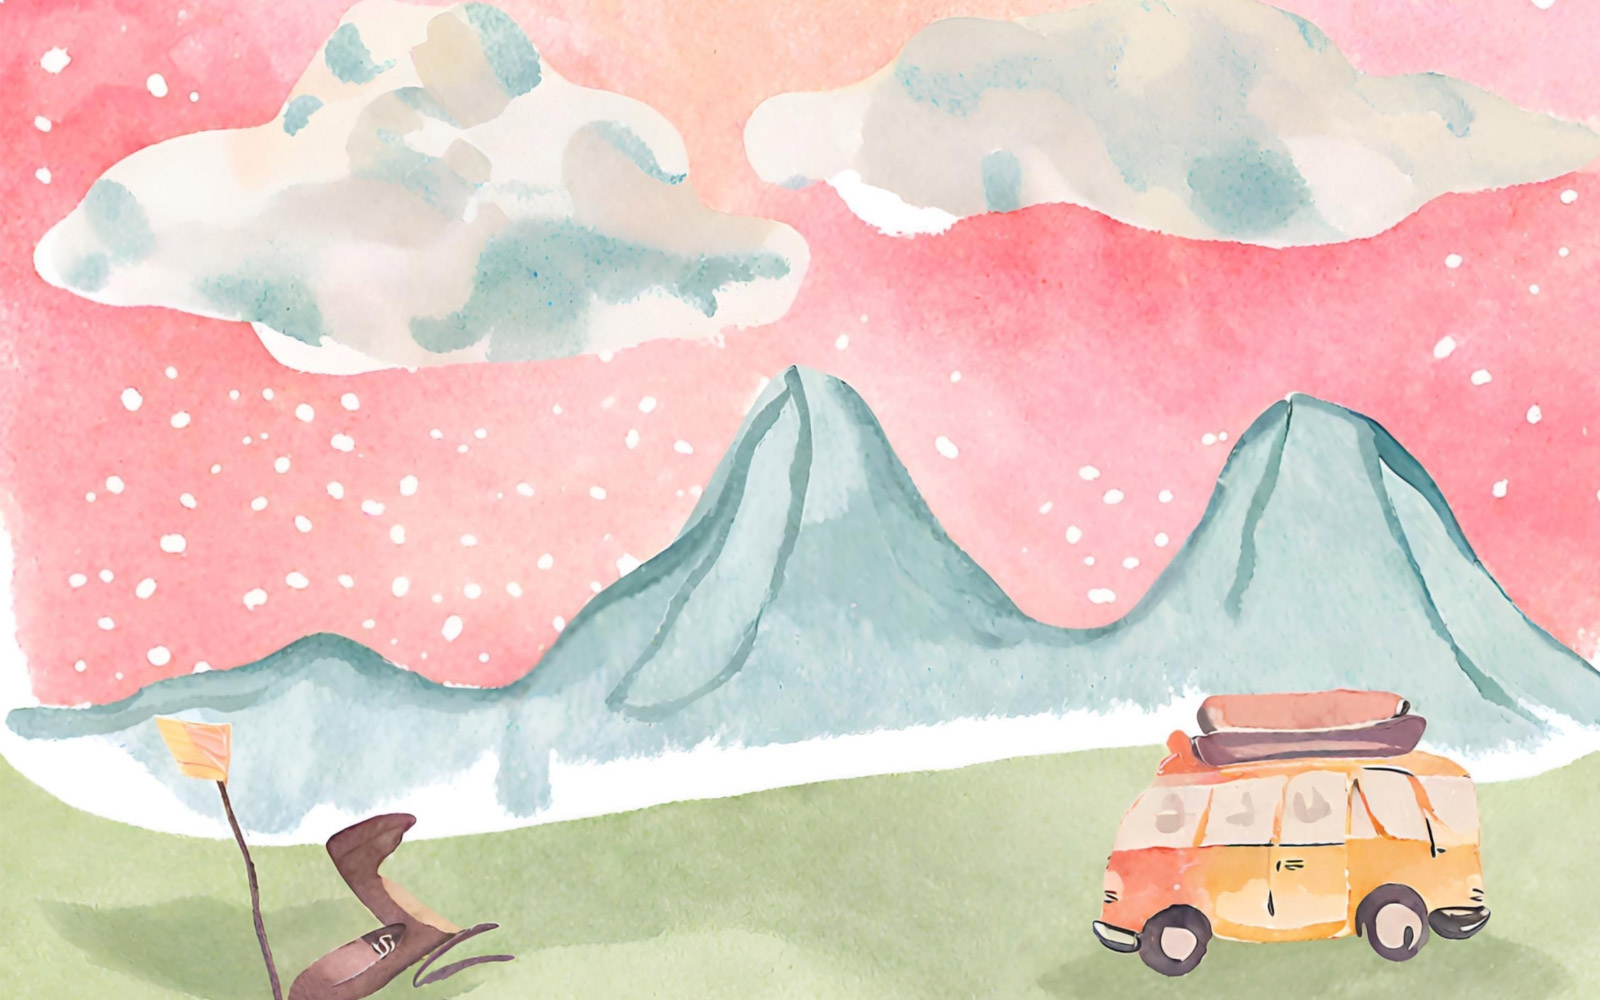 Watercolor illustration of a camper van on the background of mountains